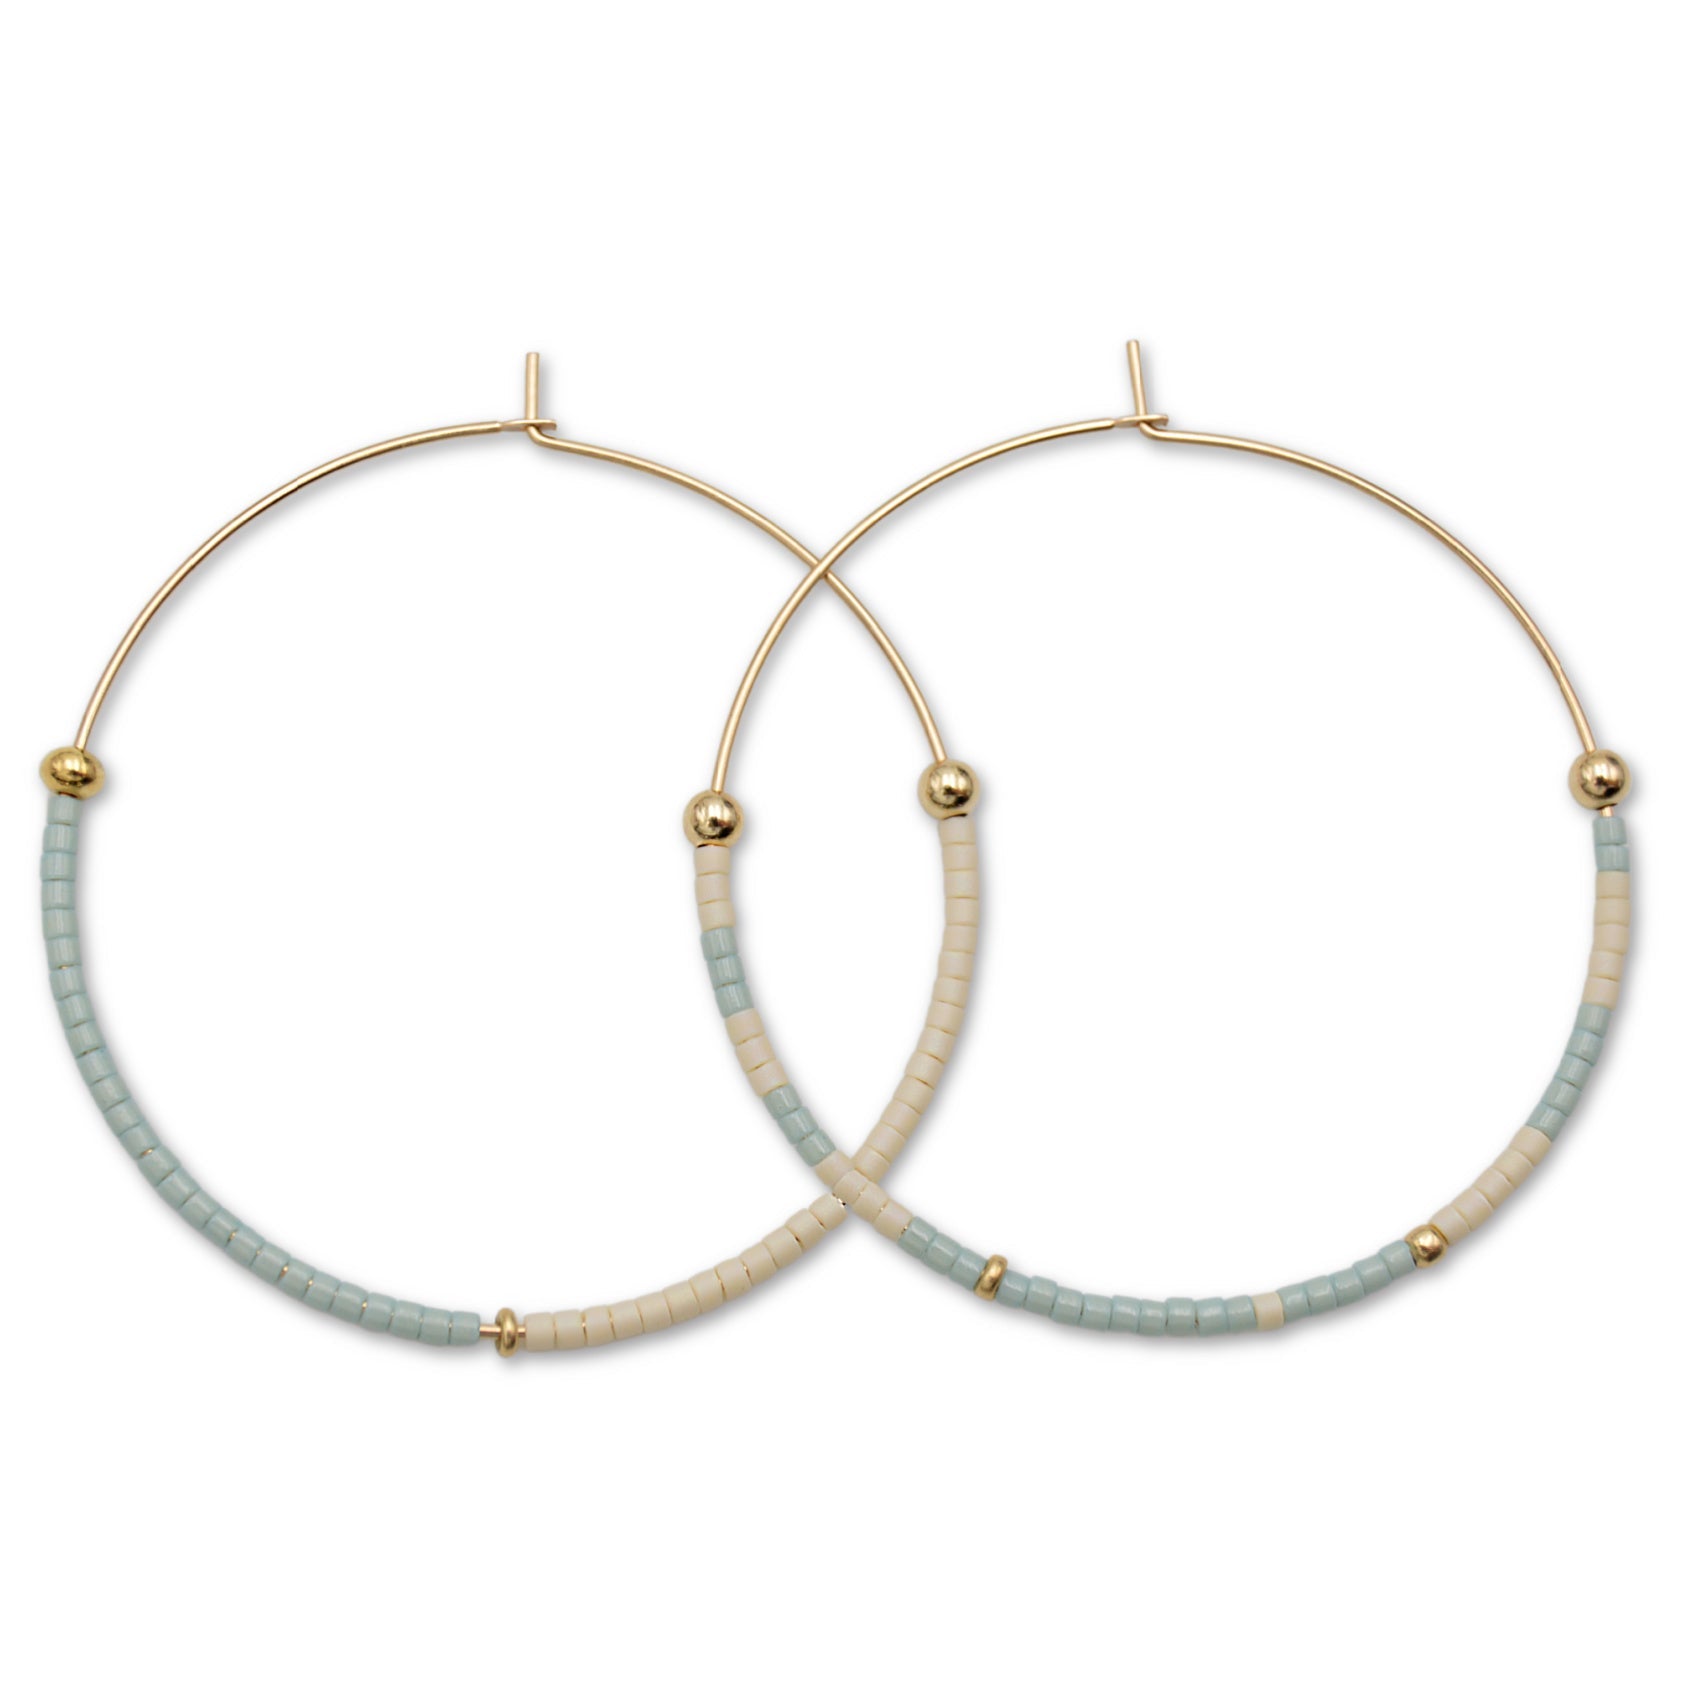 Sky blue and Cream gold filled hoops